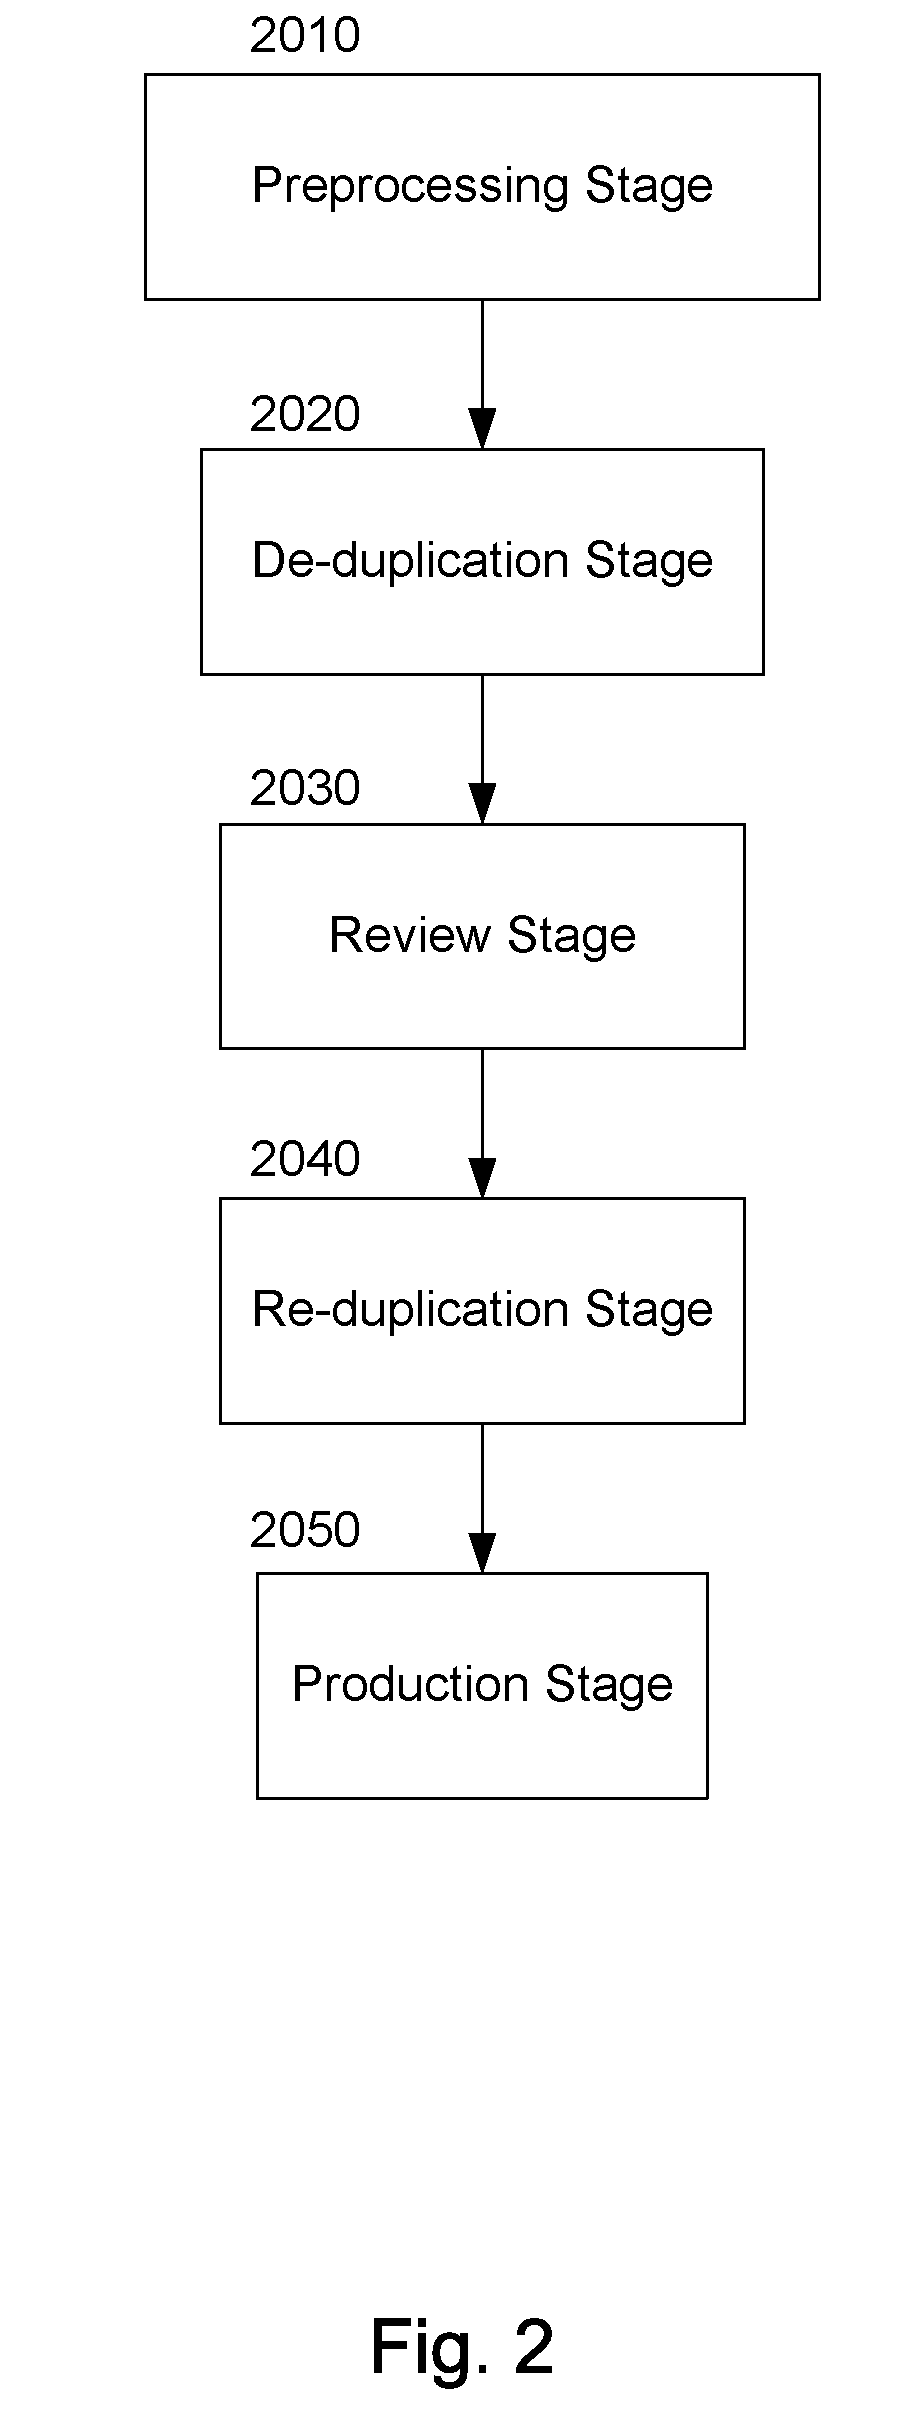 Method and System for Producing and Organizing Electronically Stored Information